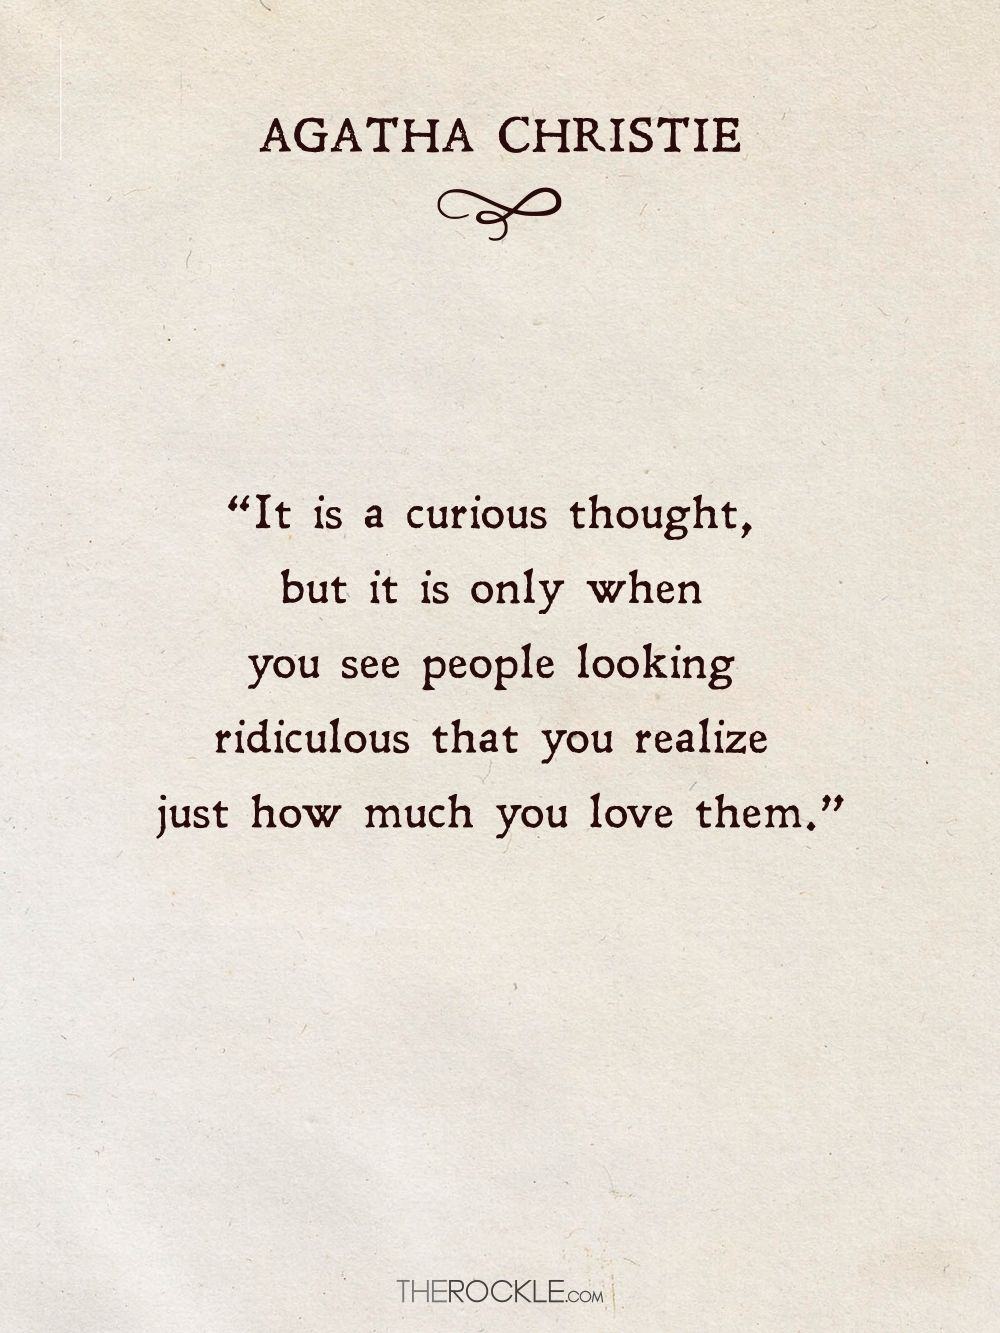 “It is a curious thought, but it is only when you see people looking ridiculous that you realize just how much you love them.” ― Agatha Christie: An Autobiography